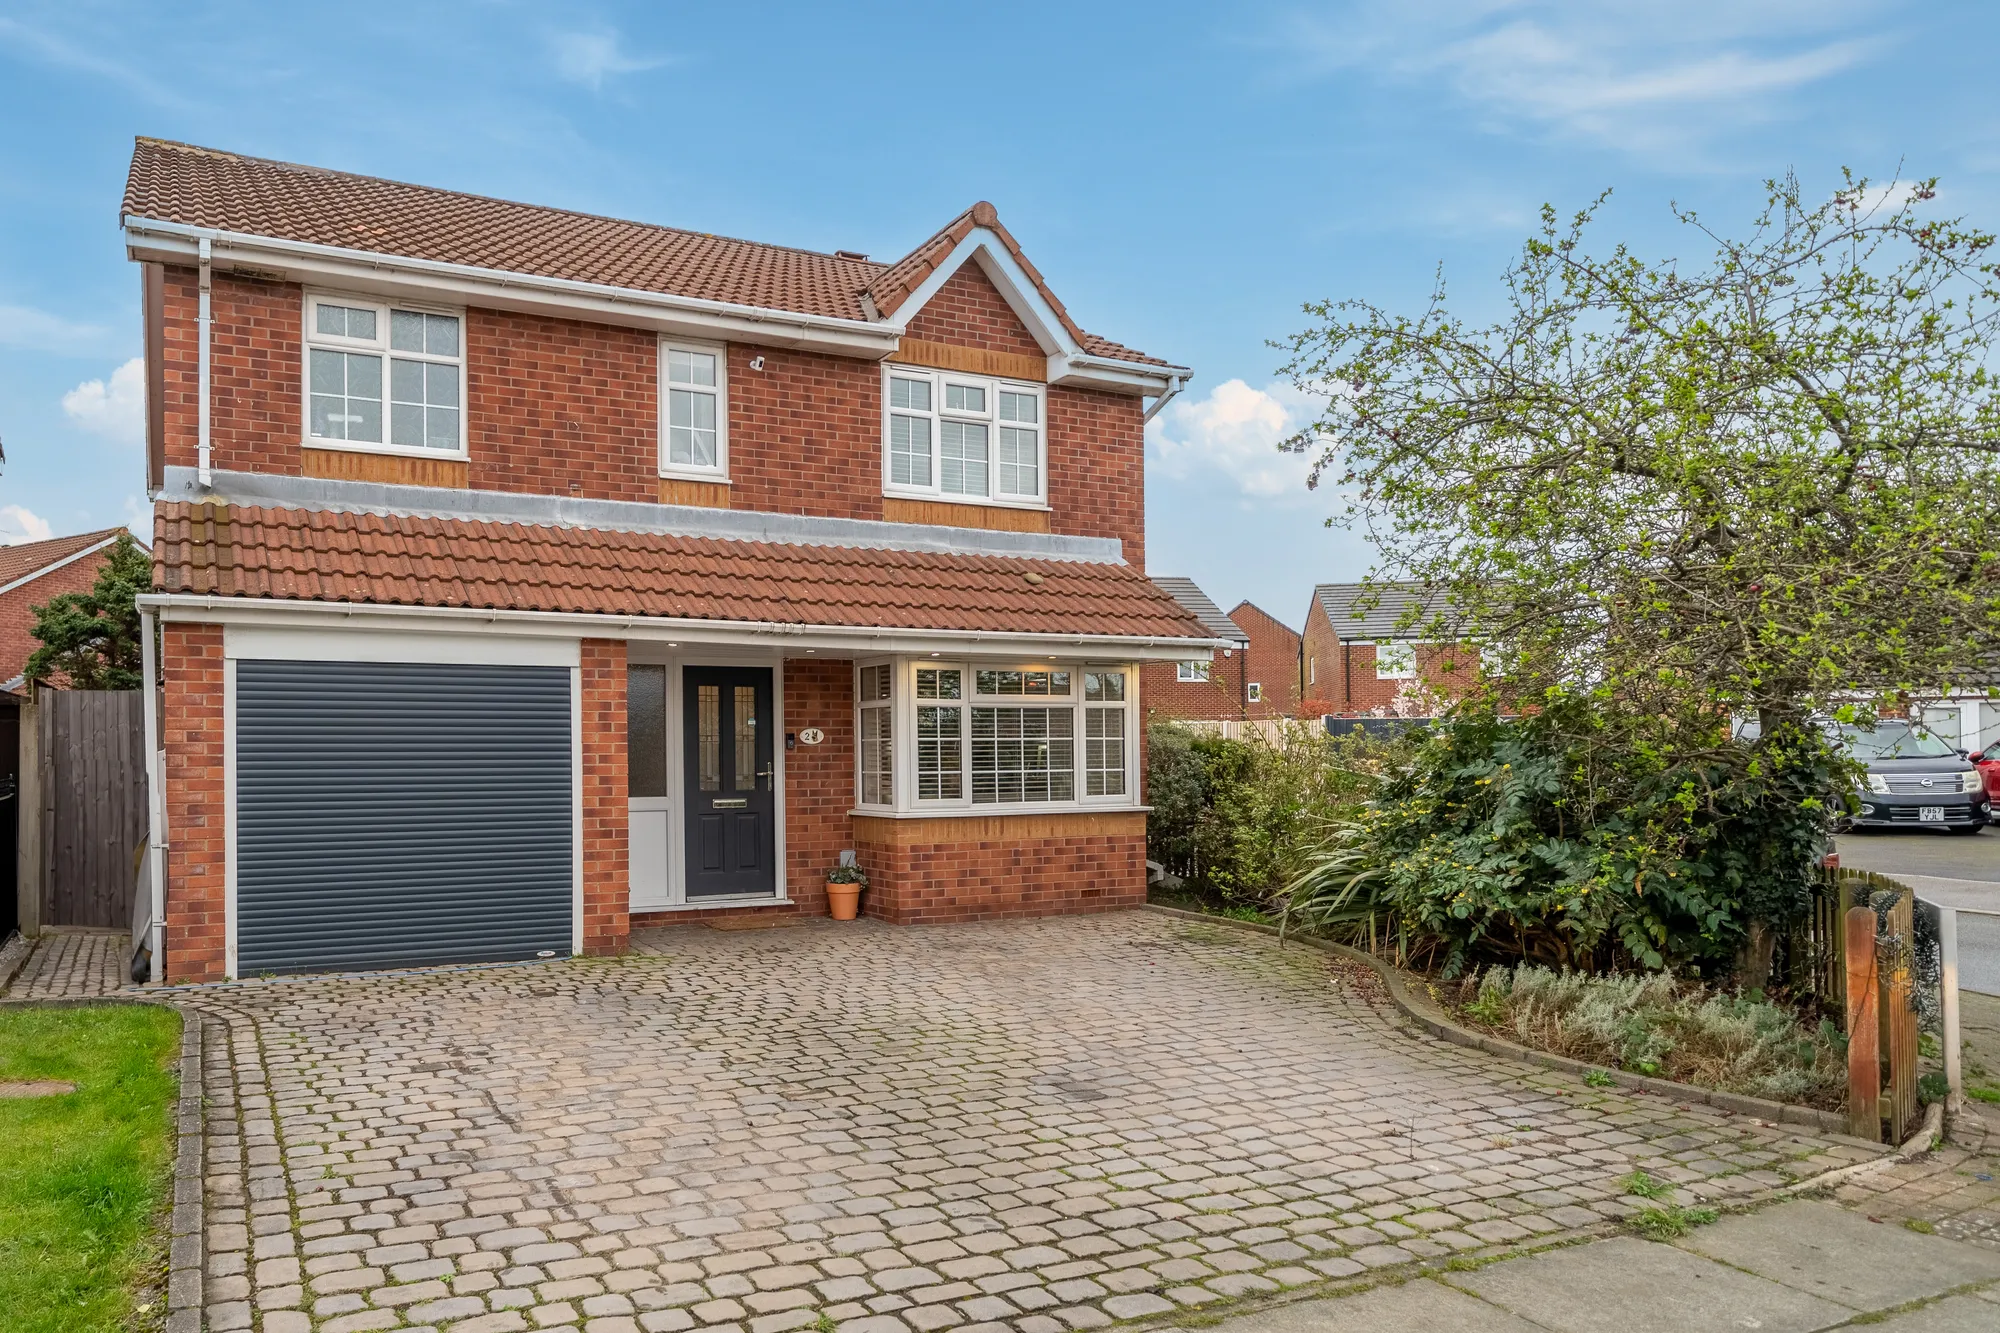 Captivating extended detached 4-bed family home in sought-after L9 Orrell Park area. Spacious lounge with media wall, 26ft breakfast kitchen, stunning orangery diner, en suite, bathroom, WC, utility area. Tranquil cul de sac location near amenities.